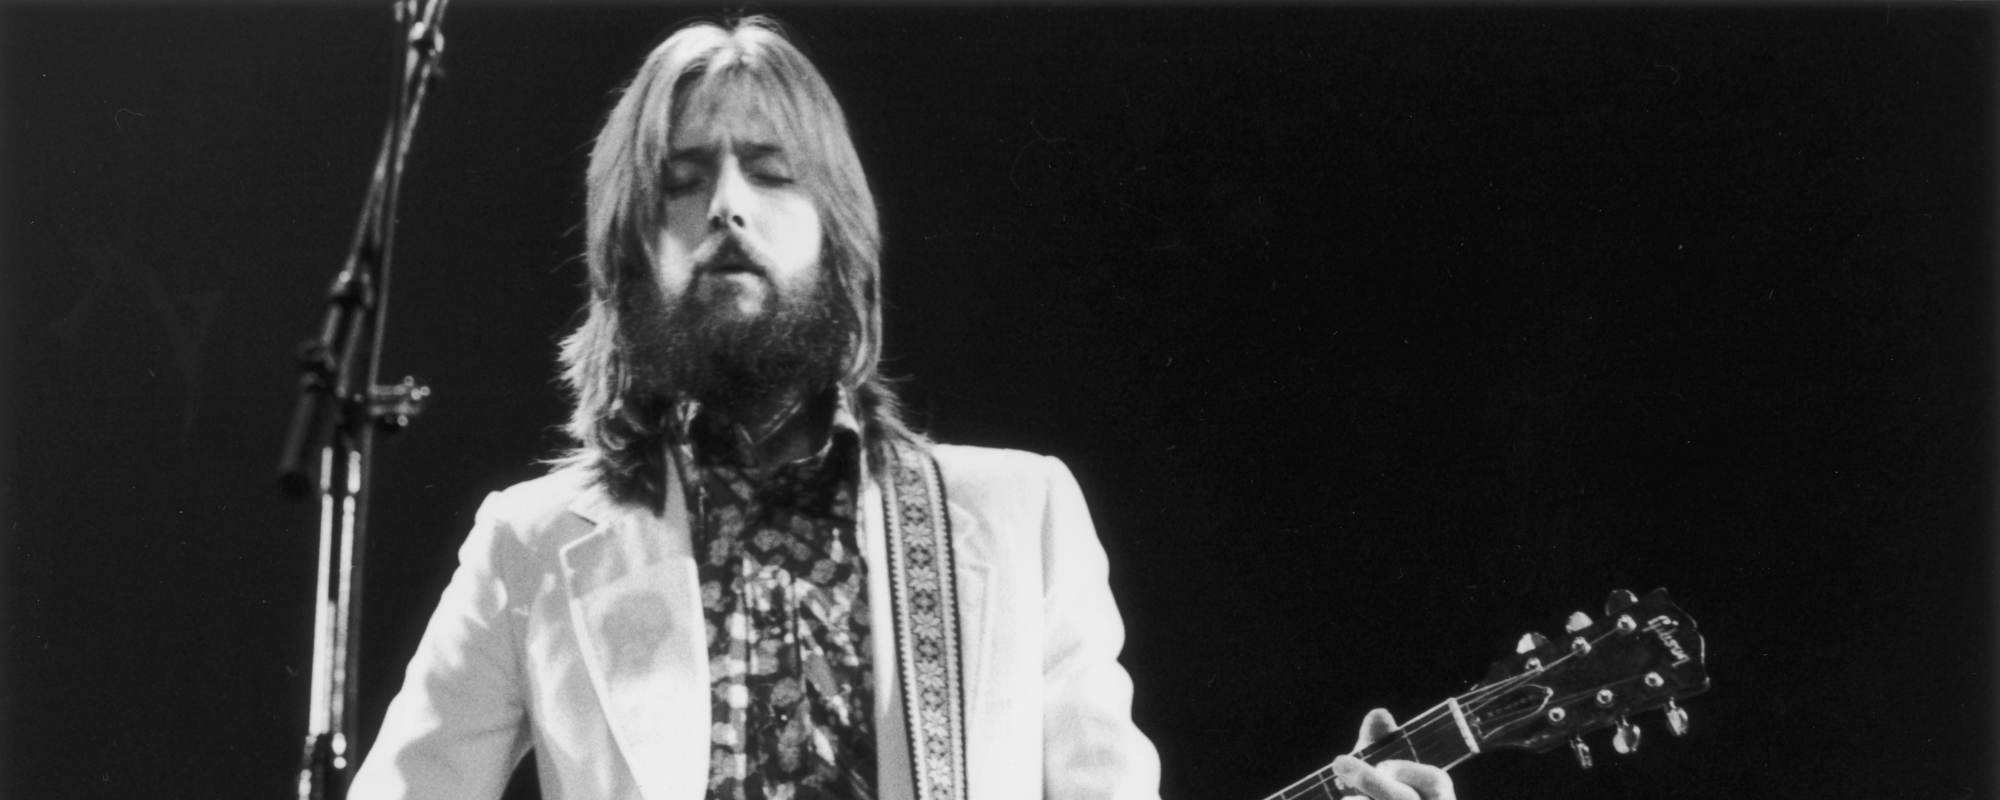 10 Legendary Albums You Didn’t Know Feature Eric Clapton